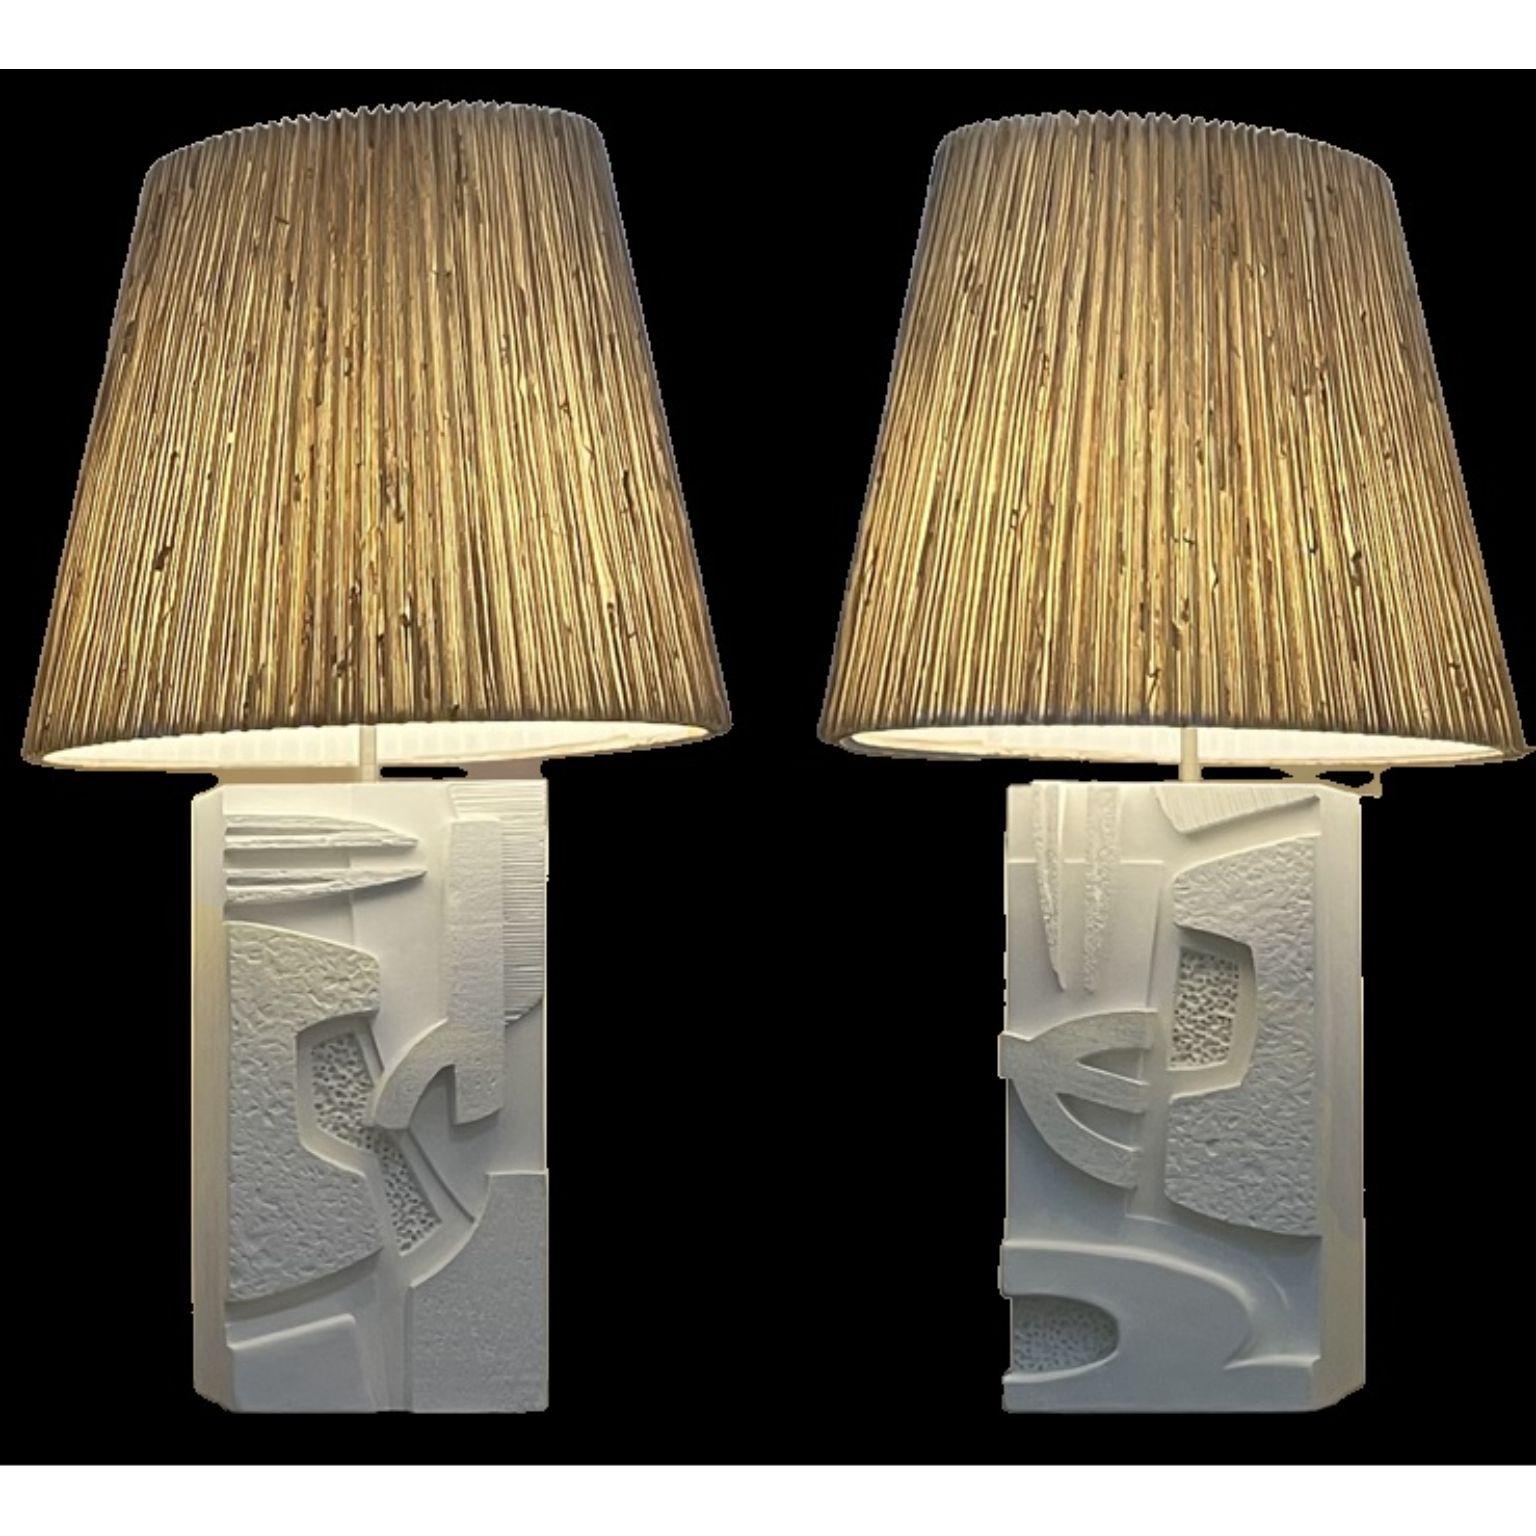 Set of 2 Complementary Pêle-Mêle Table Lamps by Daniel Schneiger
One of a Kind.
Dimensions: D 15,3 x W 23 x H 45,8 cm (each).
Materials: Cast from gypsum plaster.

These lamps are a complementary pair inspired by the collages of Matisse, hence the